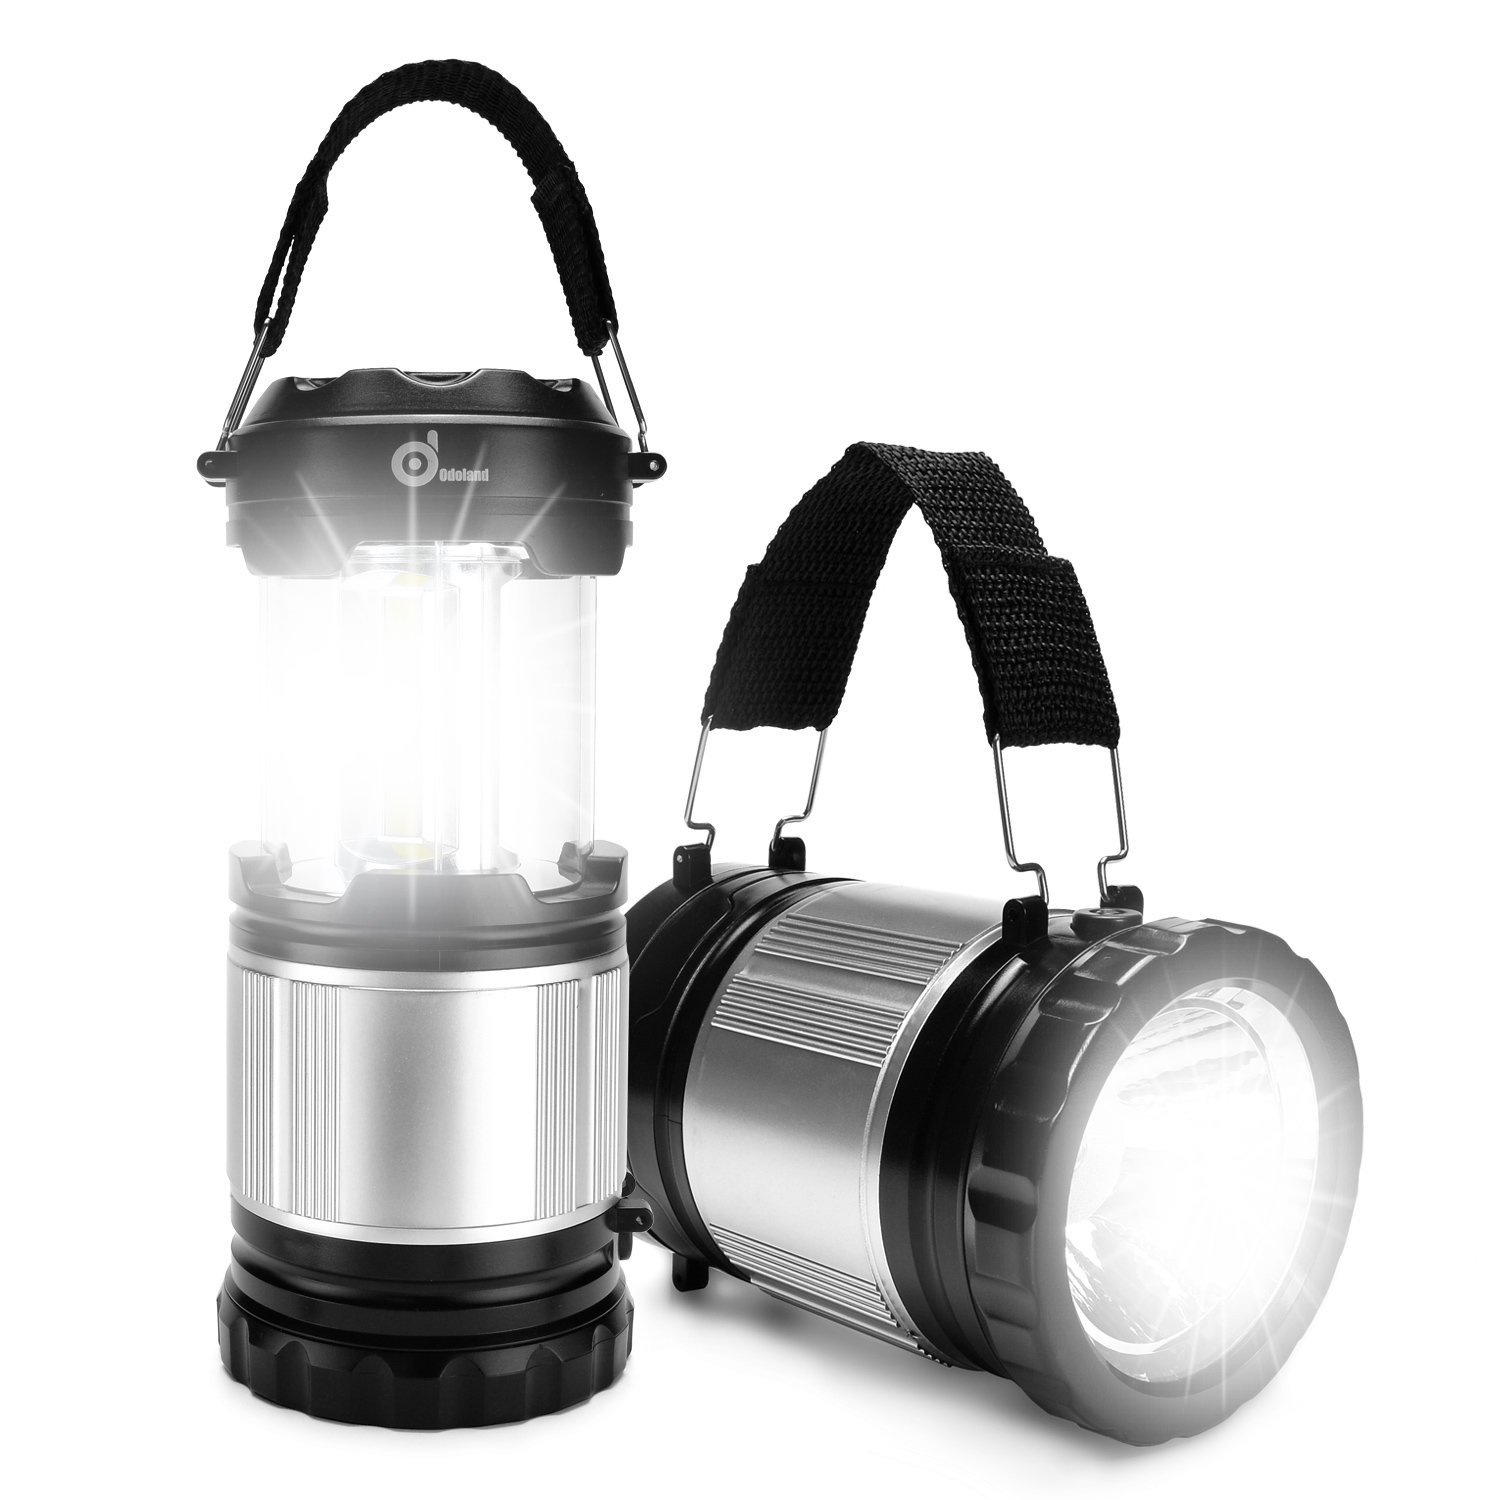 ODOLAND 2-In-1 300 Lumen LED Camping Lantern Only $5.99! (Grab For Your 72hr Kits!)